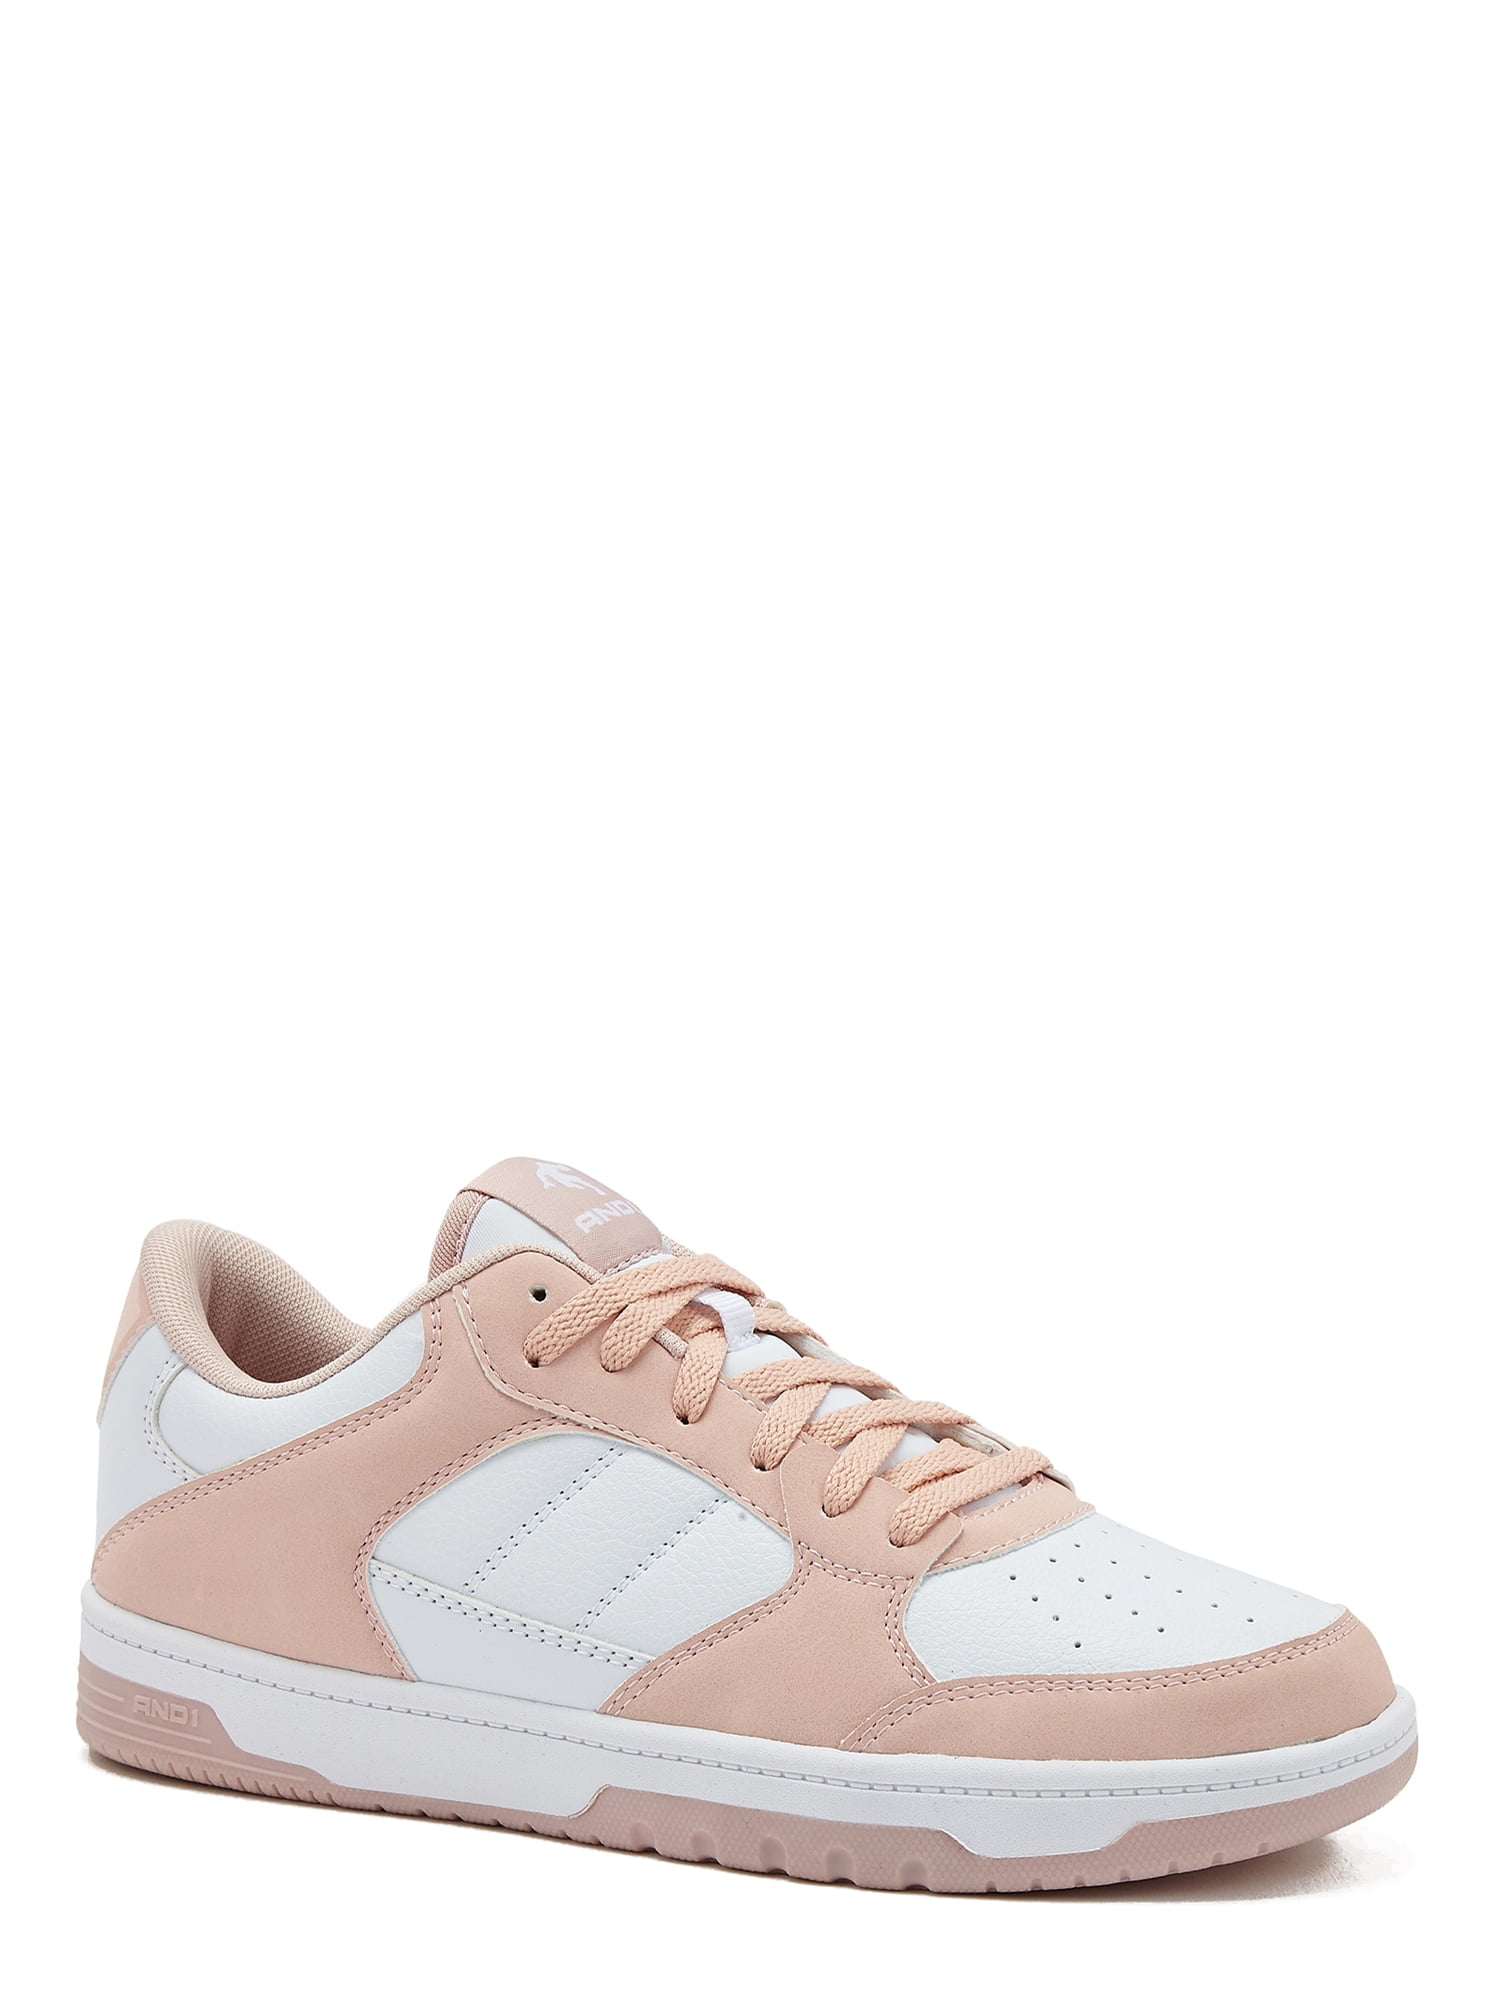 AND1 Women's Low Top Basketball Sneaker 